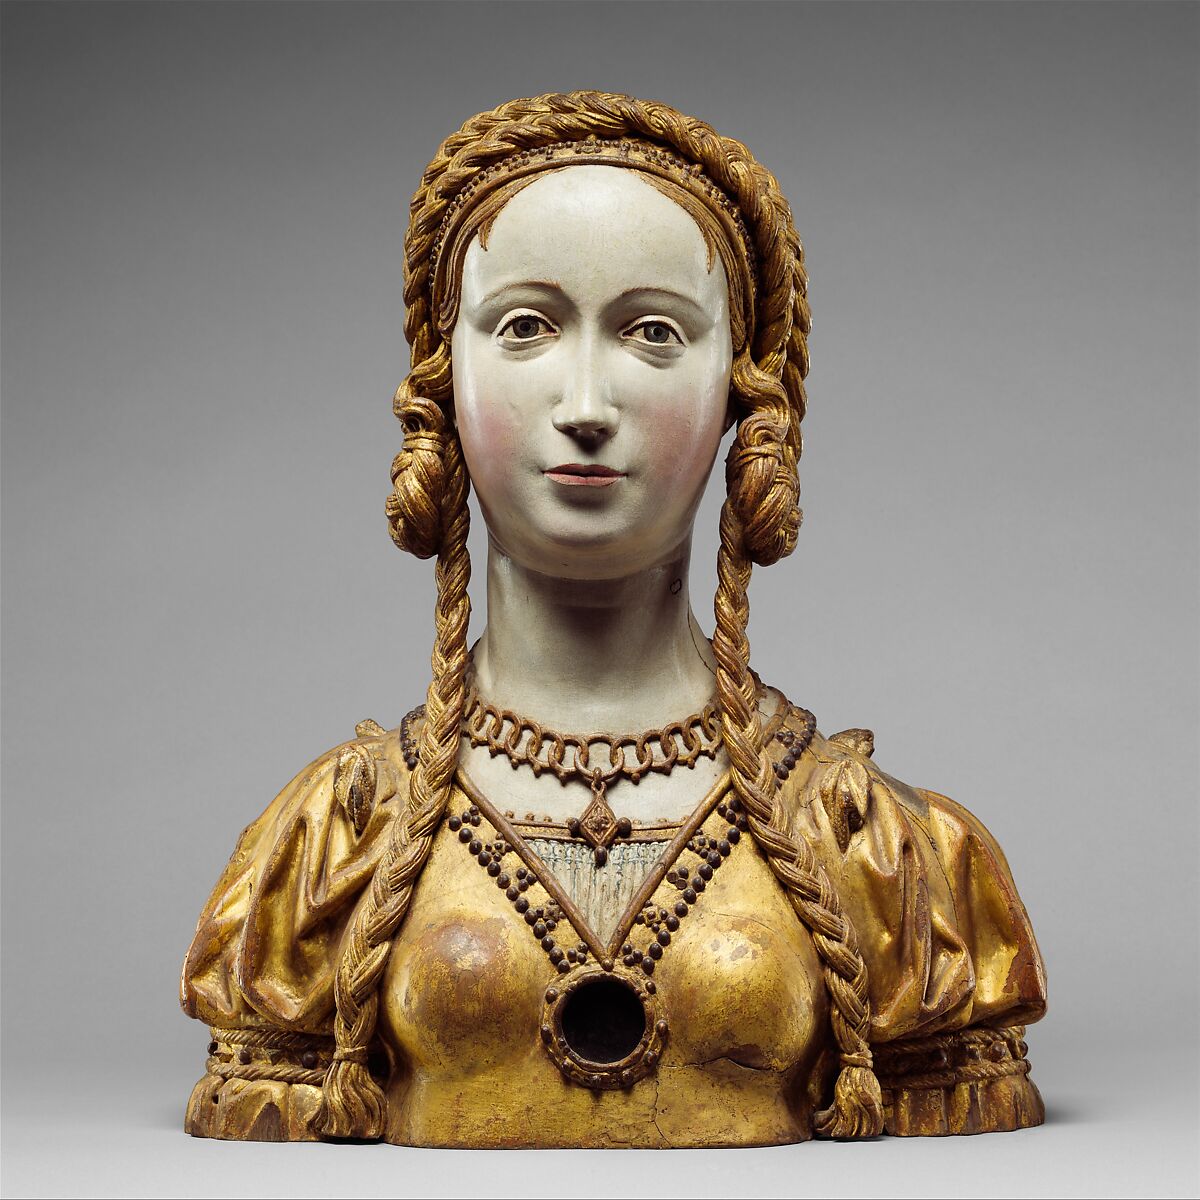 Reliquary bust of a companion of Saint Ursula, Oak, polychromed and gilt on plaster ground; glass opening for relic, Belgian, possibly Brussels 